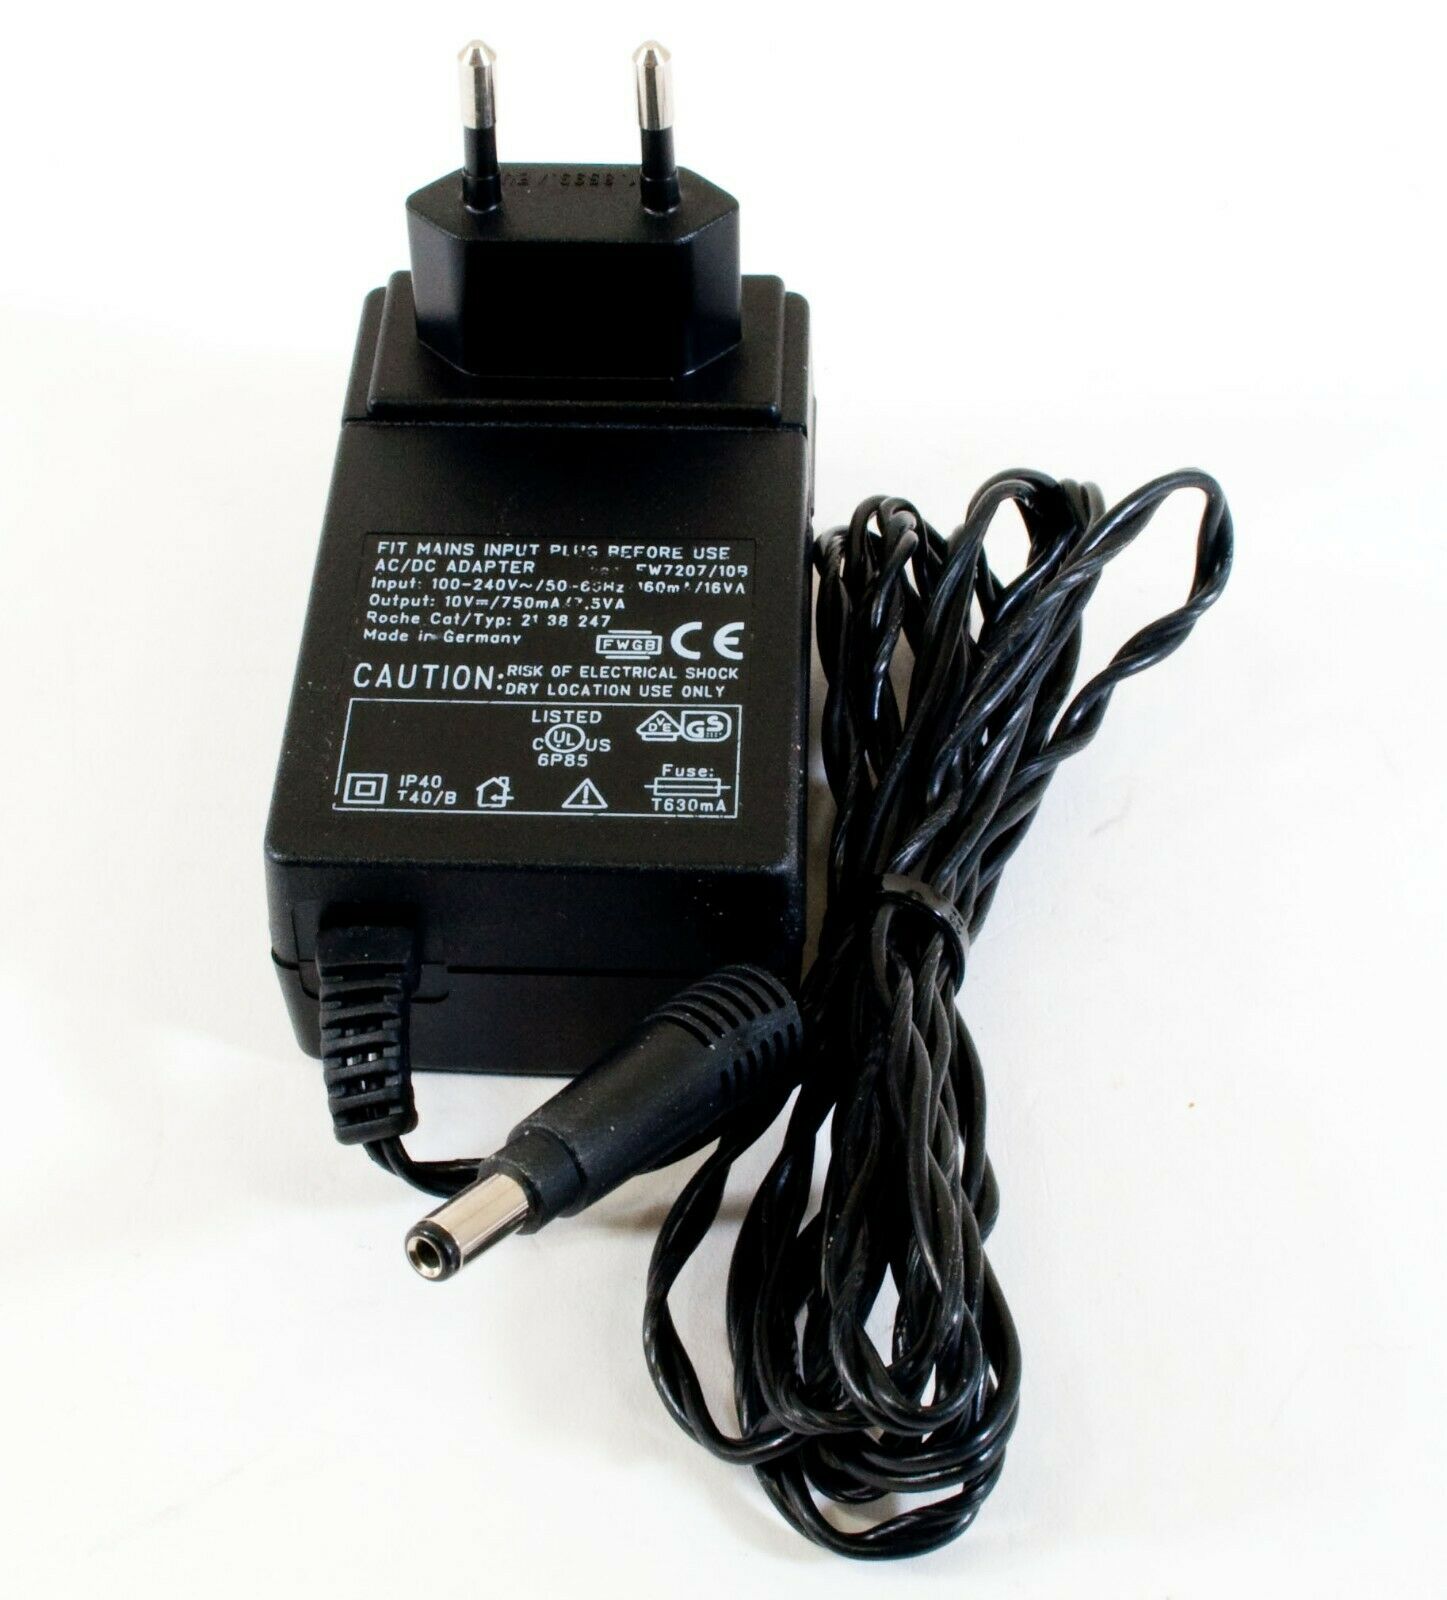 Roche FW7207/10B AC Adapter 10V 750mA Original Power Supply Europlug cosmetic wear, but is fully ... Read more Output